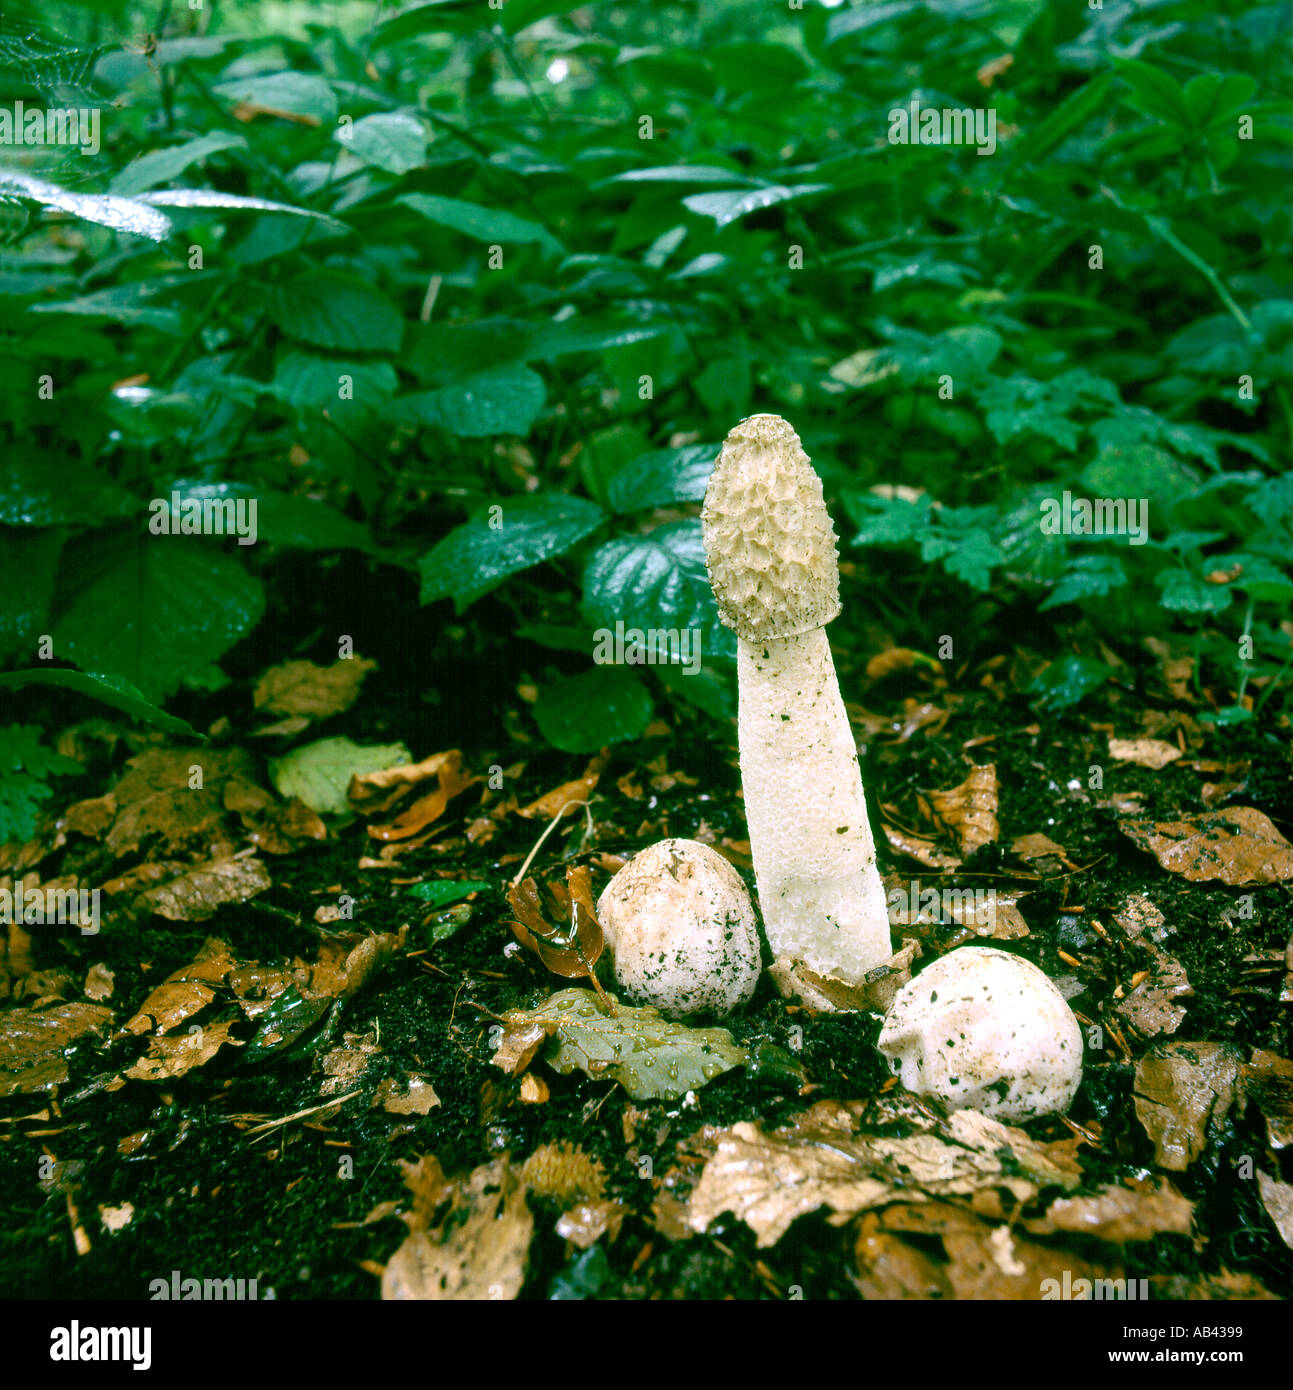 Both open and closed Stinkhorn fungi Stock Photo